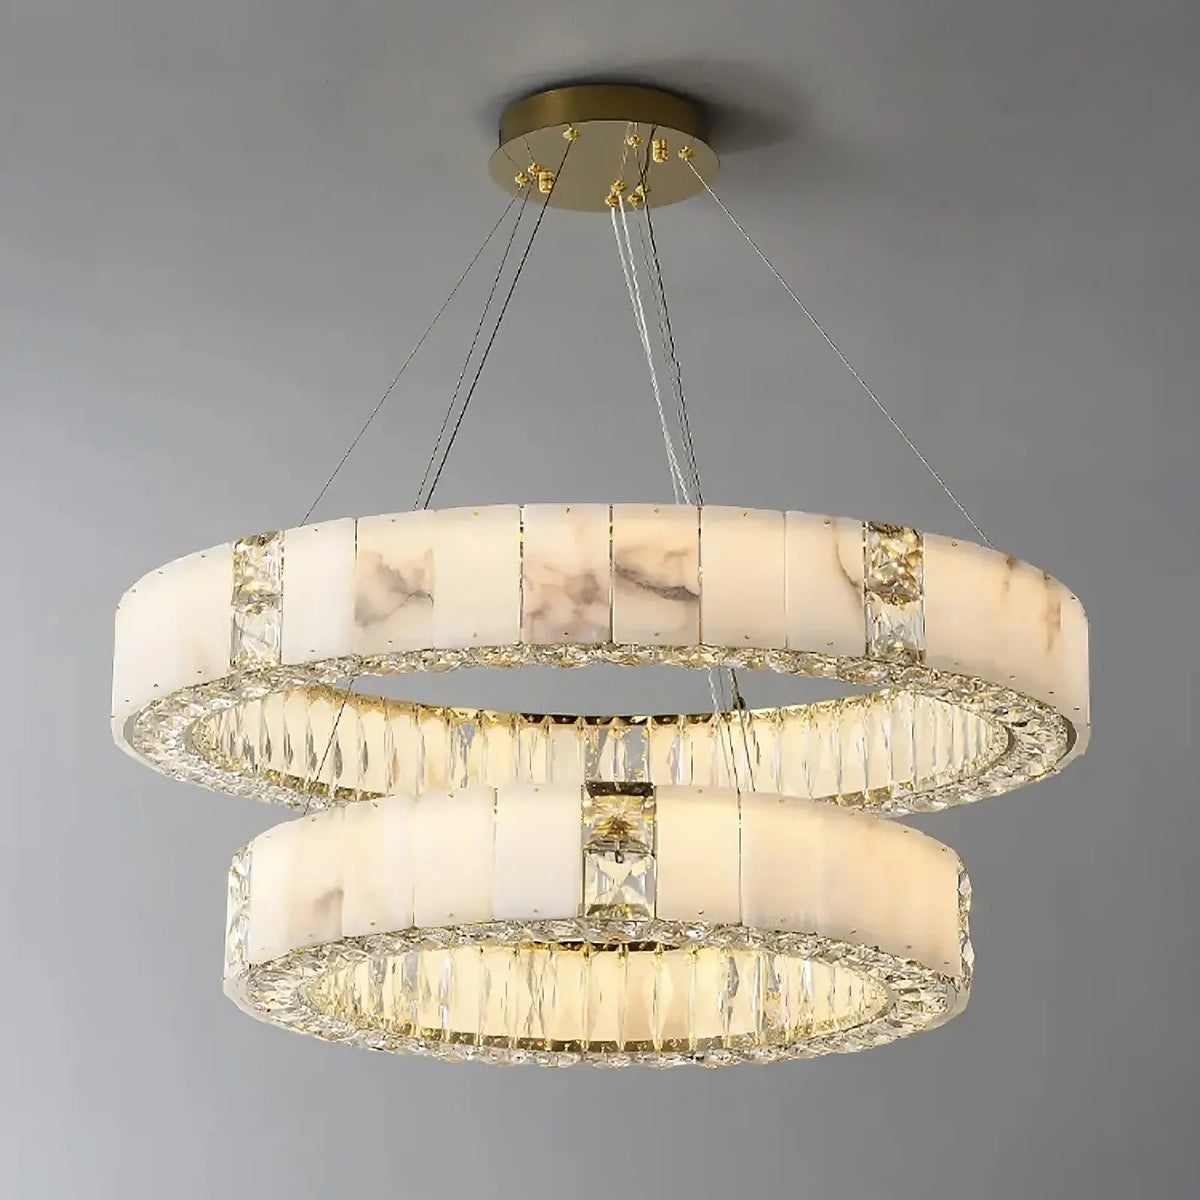 A Natural Marble & Crystal Modern Ceiling Light Fixture from Morsale.com, with two circular LED rings, adorned with a combination of opaque white and clear crystal-like segments, suspended by thin cables from a round, gold-toned base. The rings are stacked vertically, creating an elegant layered effect that complements any luxury home décor.